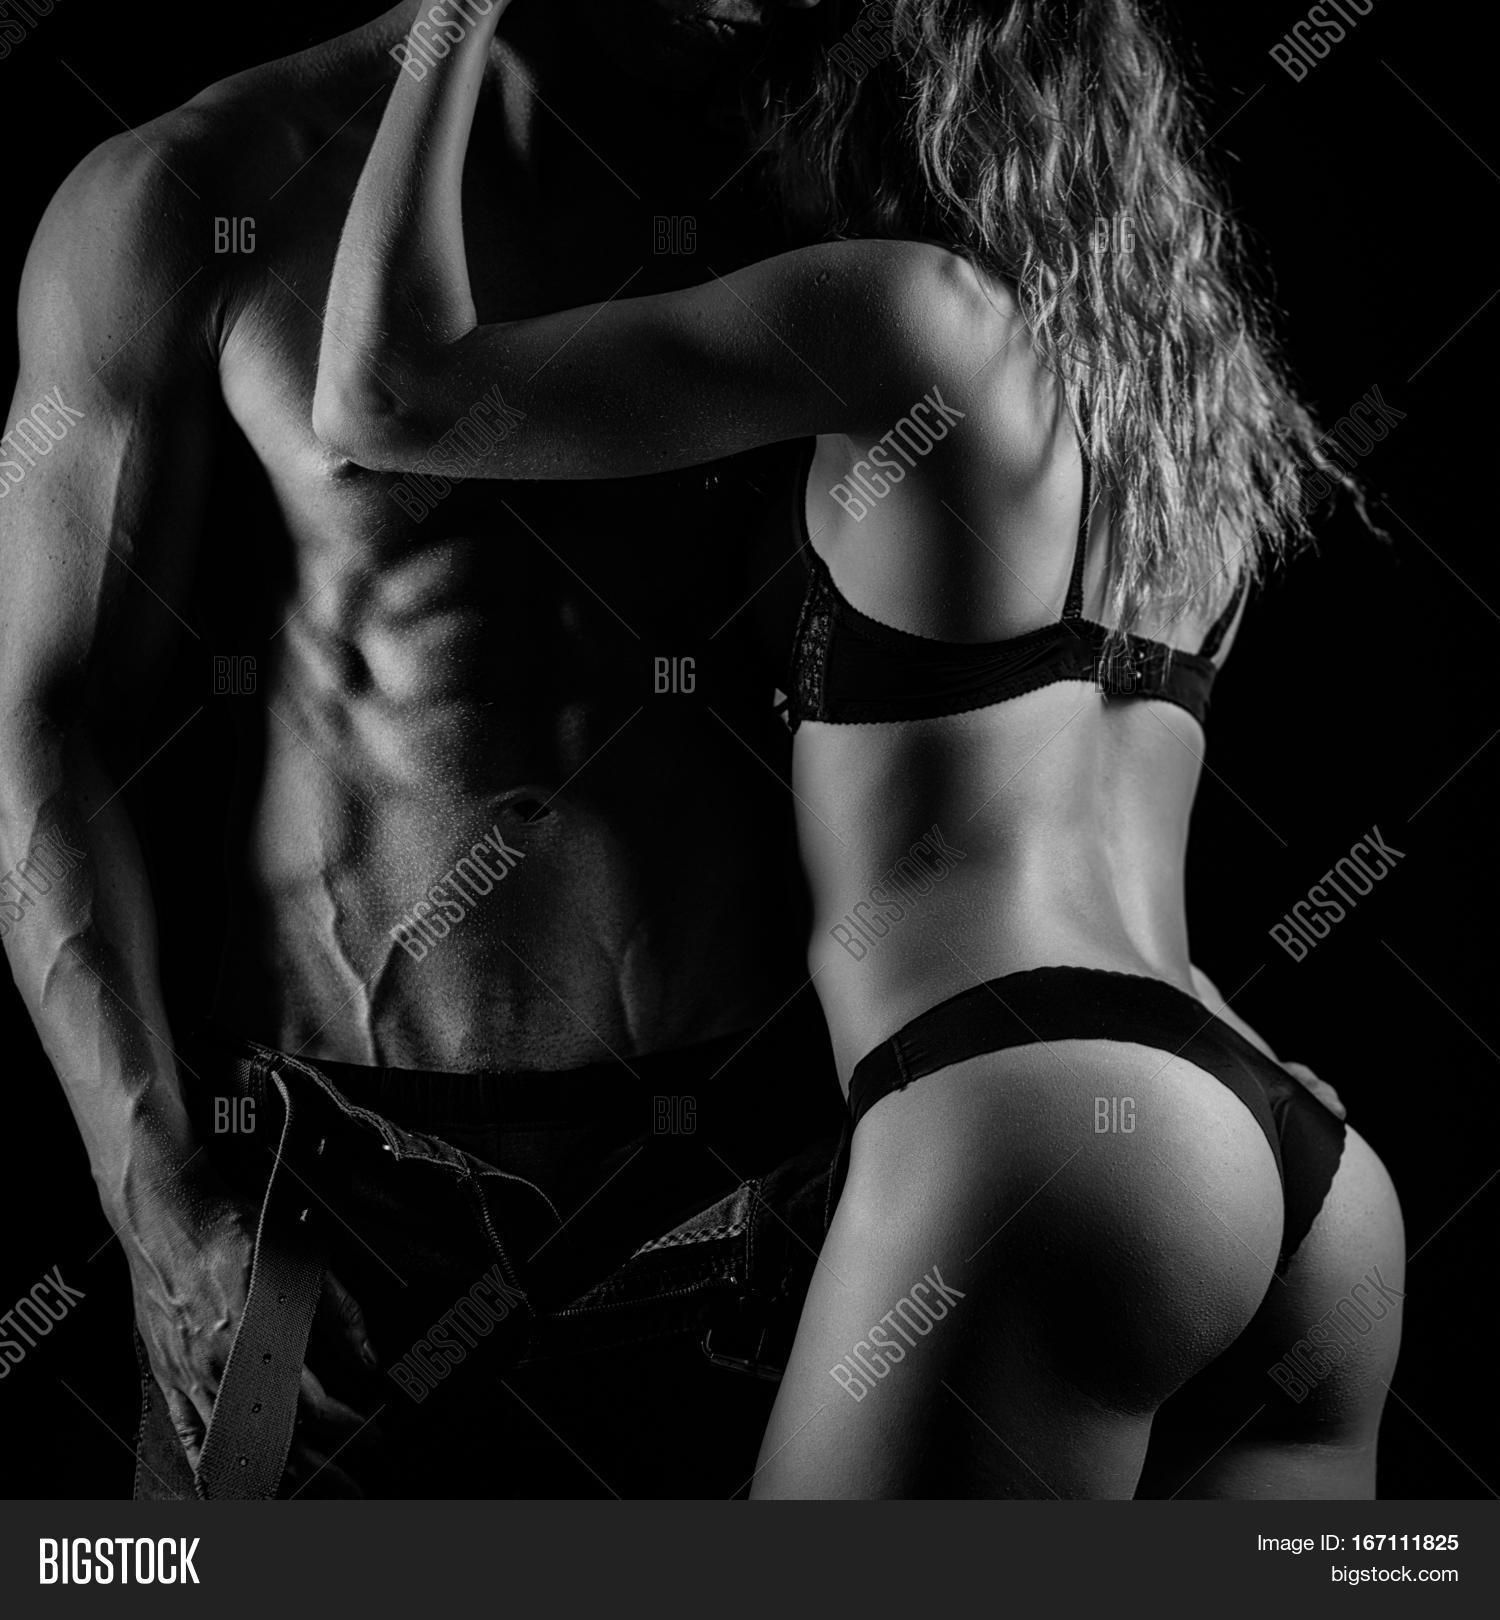 Black and white couple erotic photography 